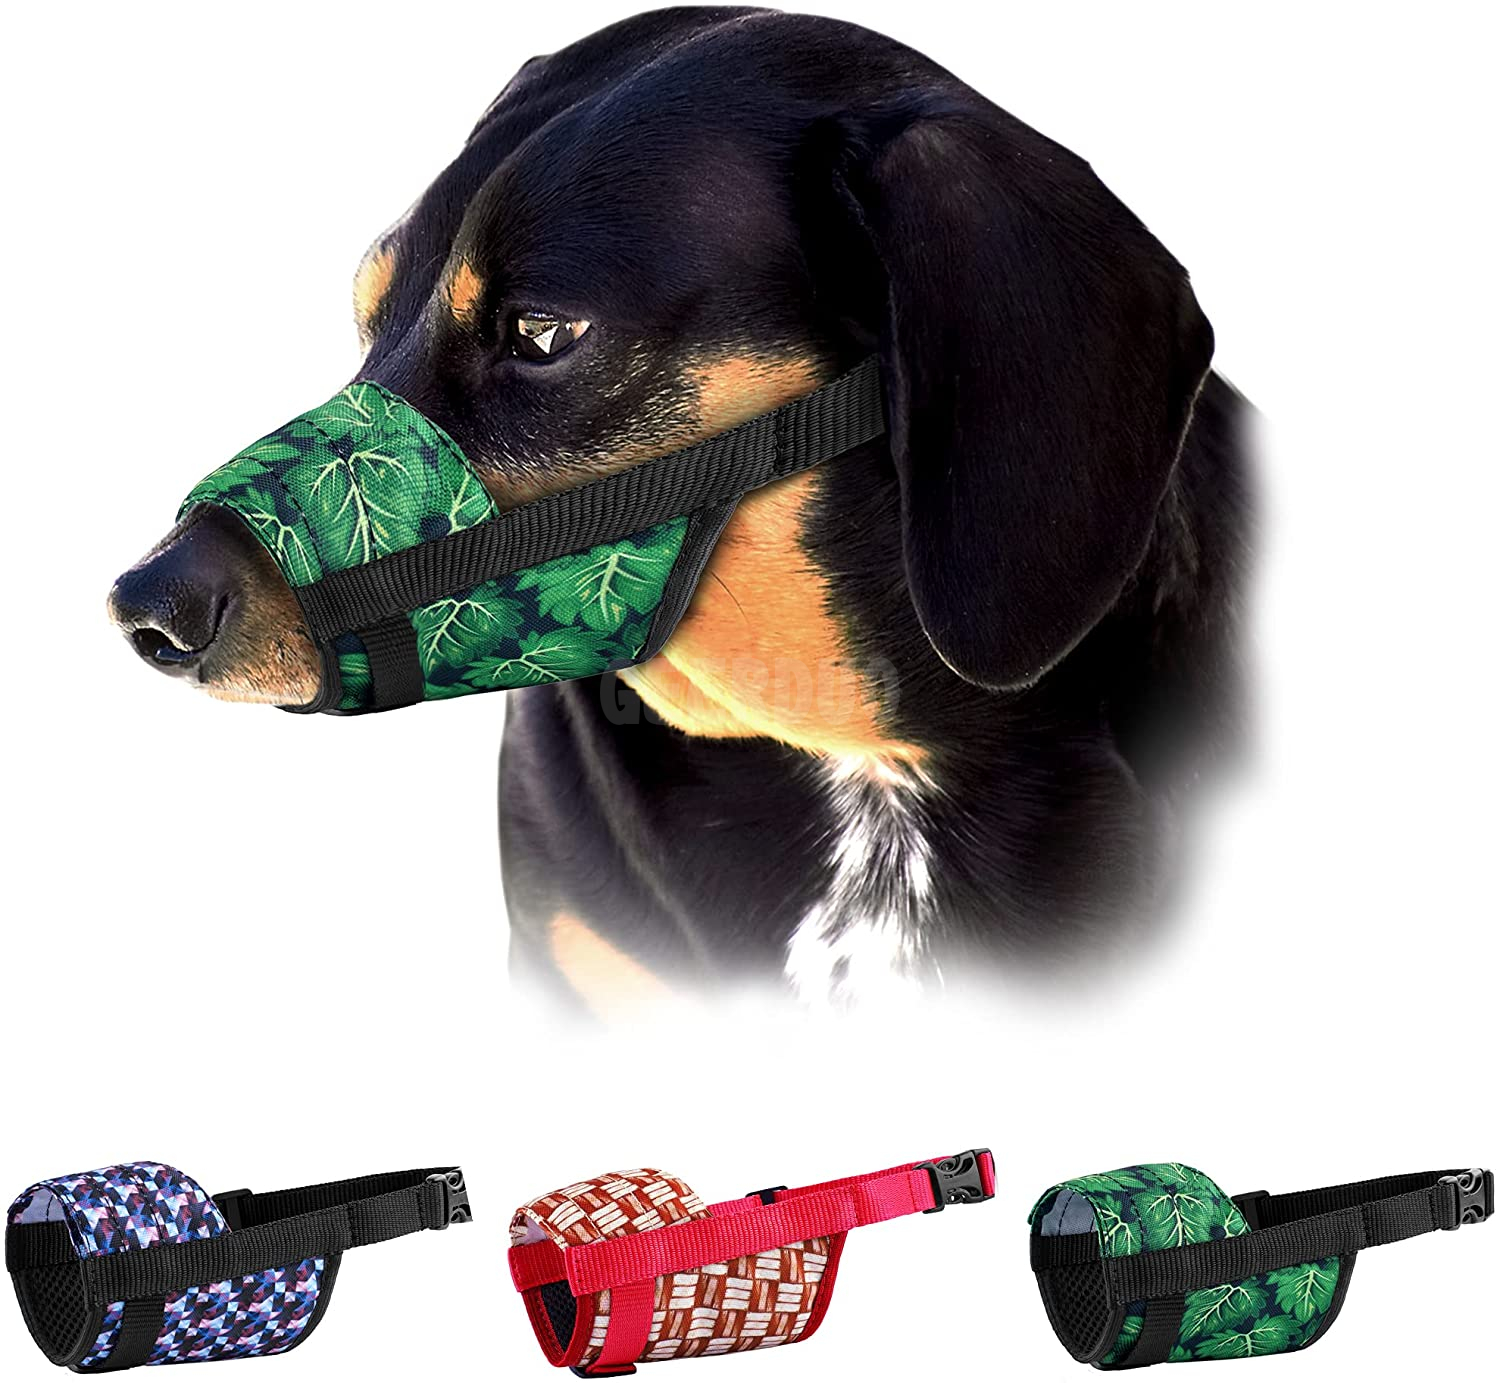 Anti-Biting Barking Pet Muzzles Mouth Cover GRDHM-1